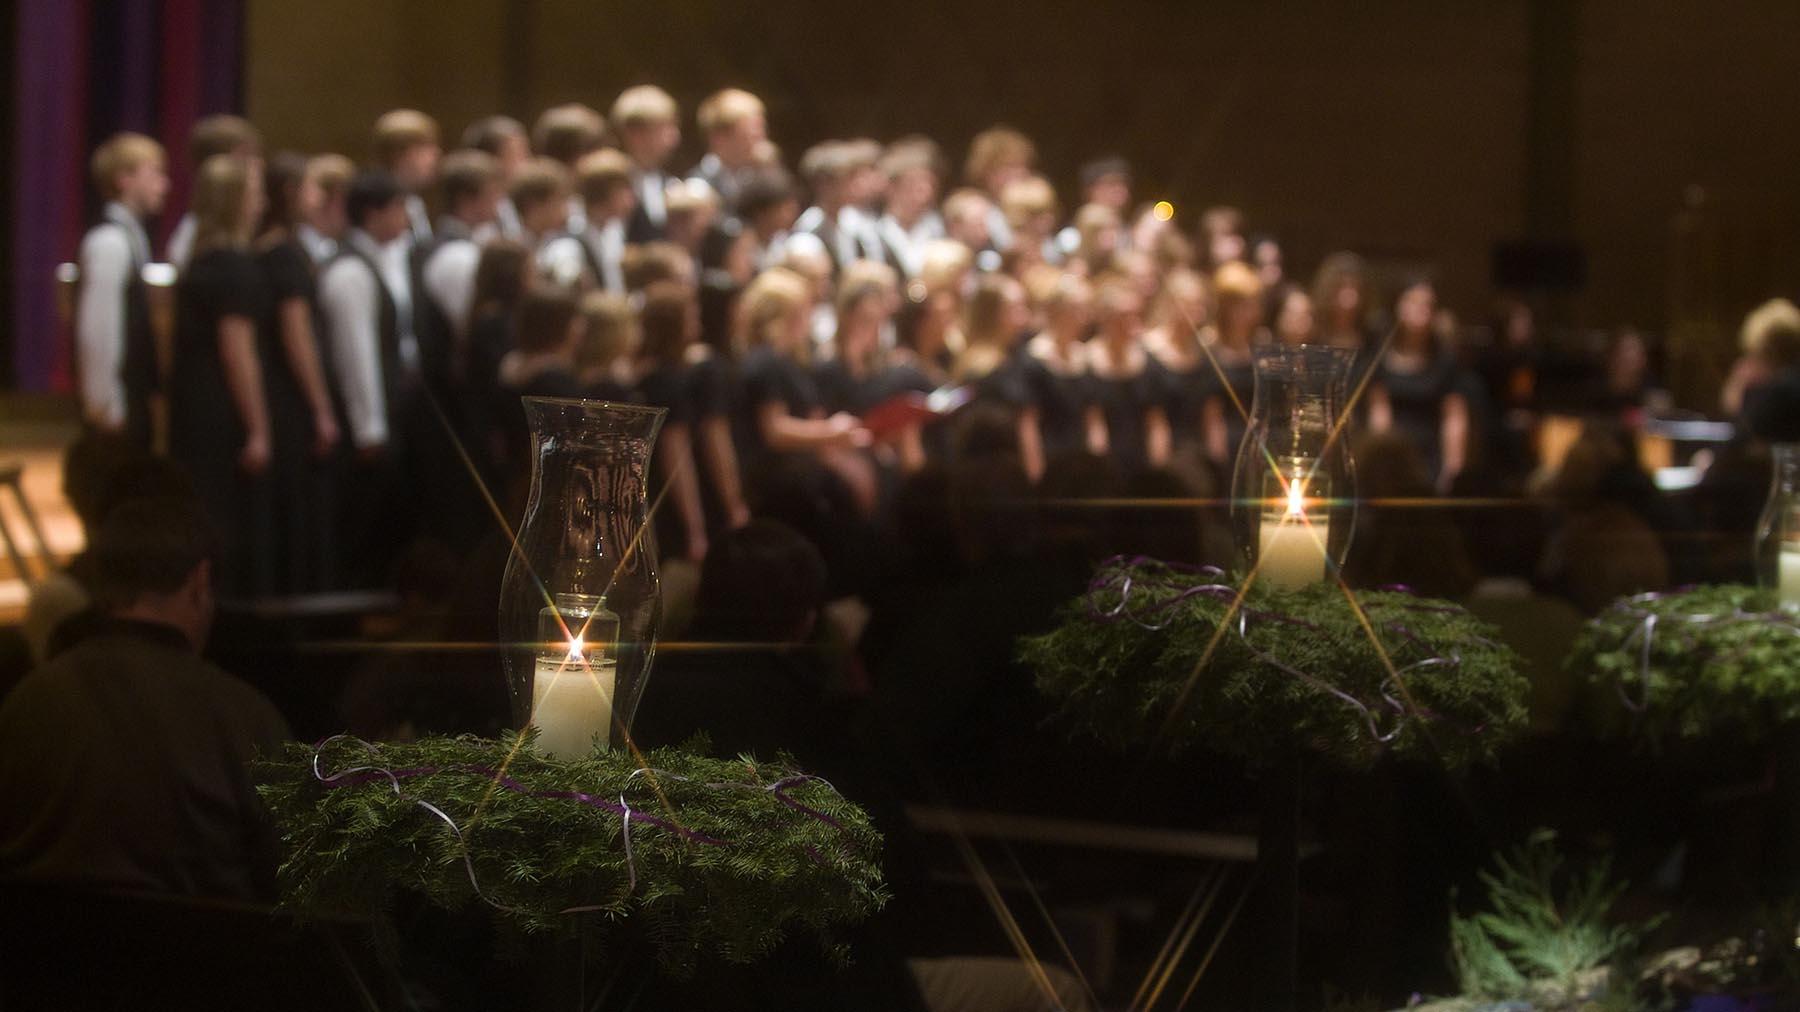 Candles and wreaths in forefront with choir singing in the background